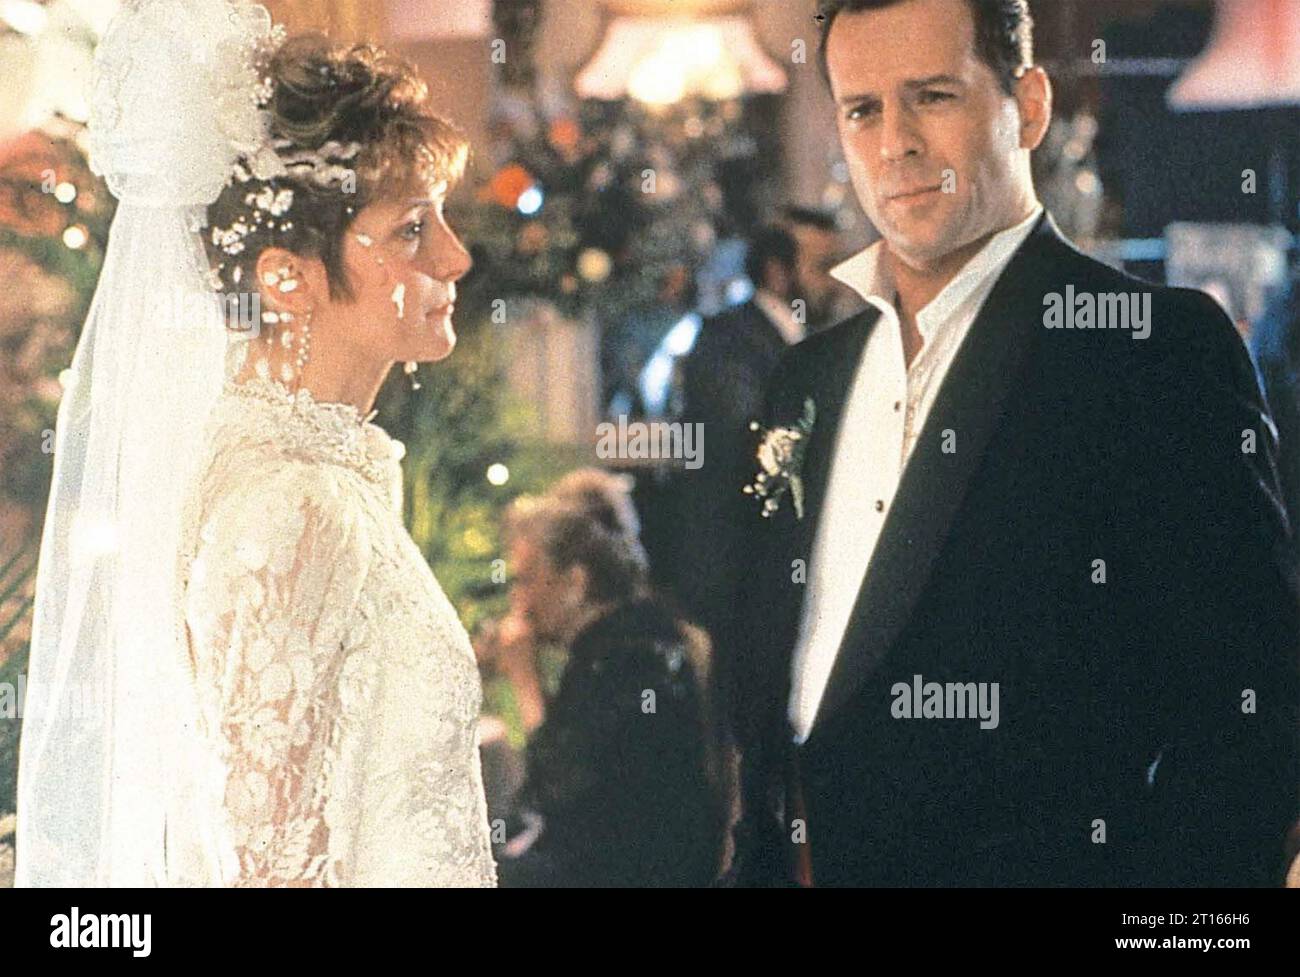 MORAL THOUGHTS 1991  Columbia Pictures film with Bruce Willis and Glenne Headly Stock Photo